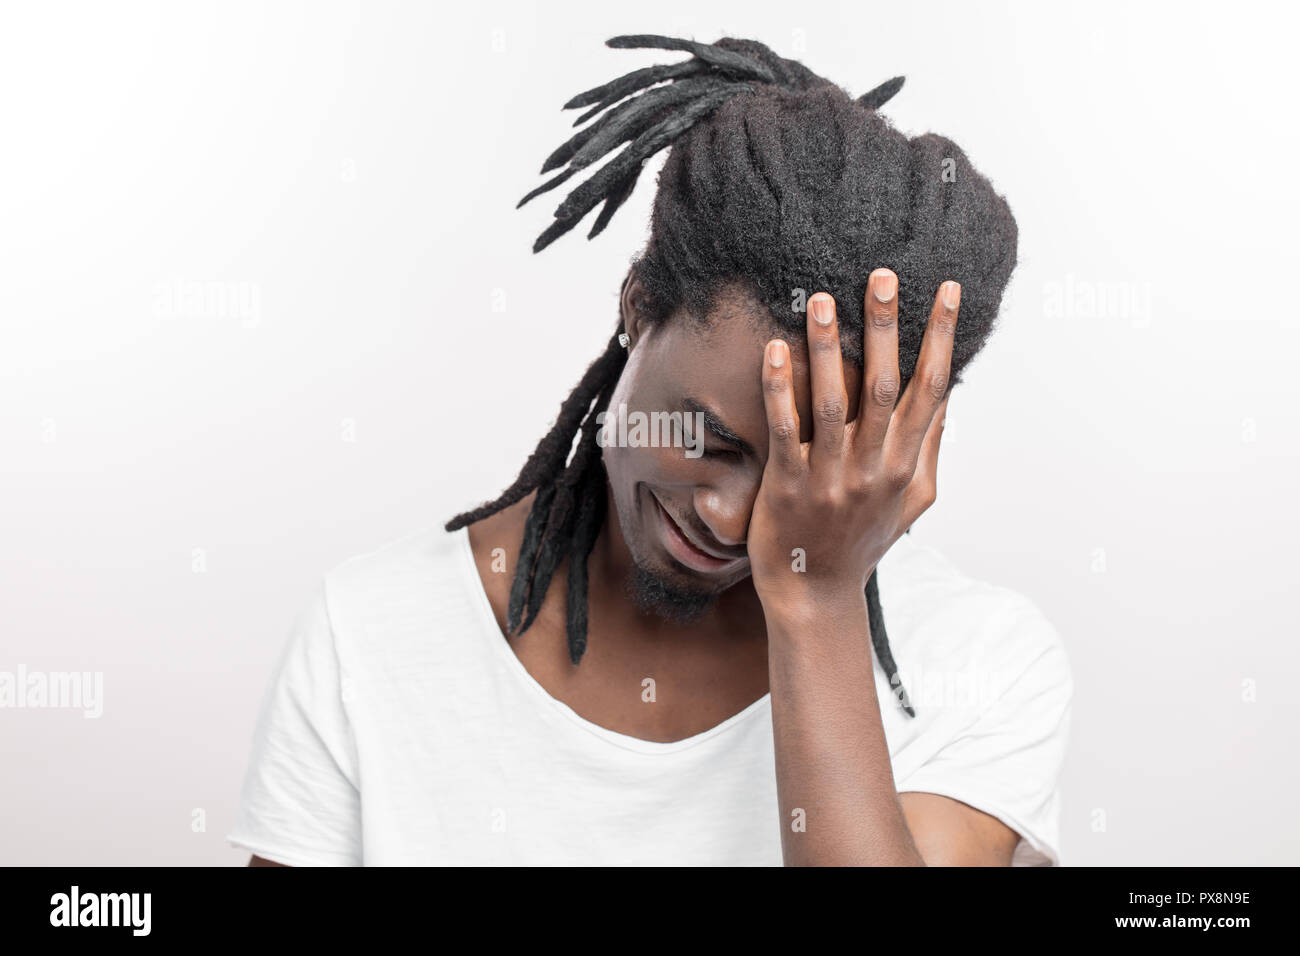 African American man with dreadlocks making facepalm gesture Stock Photo